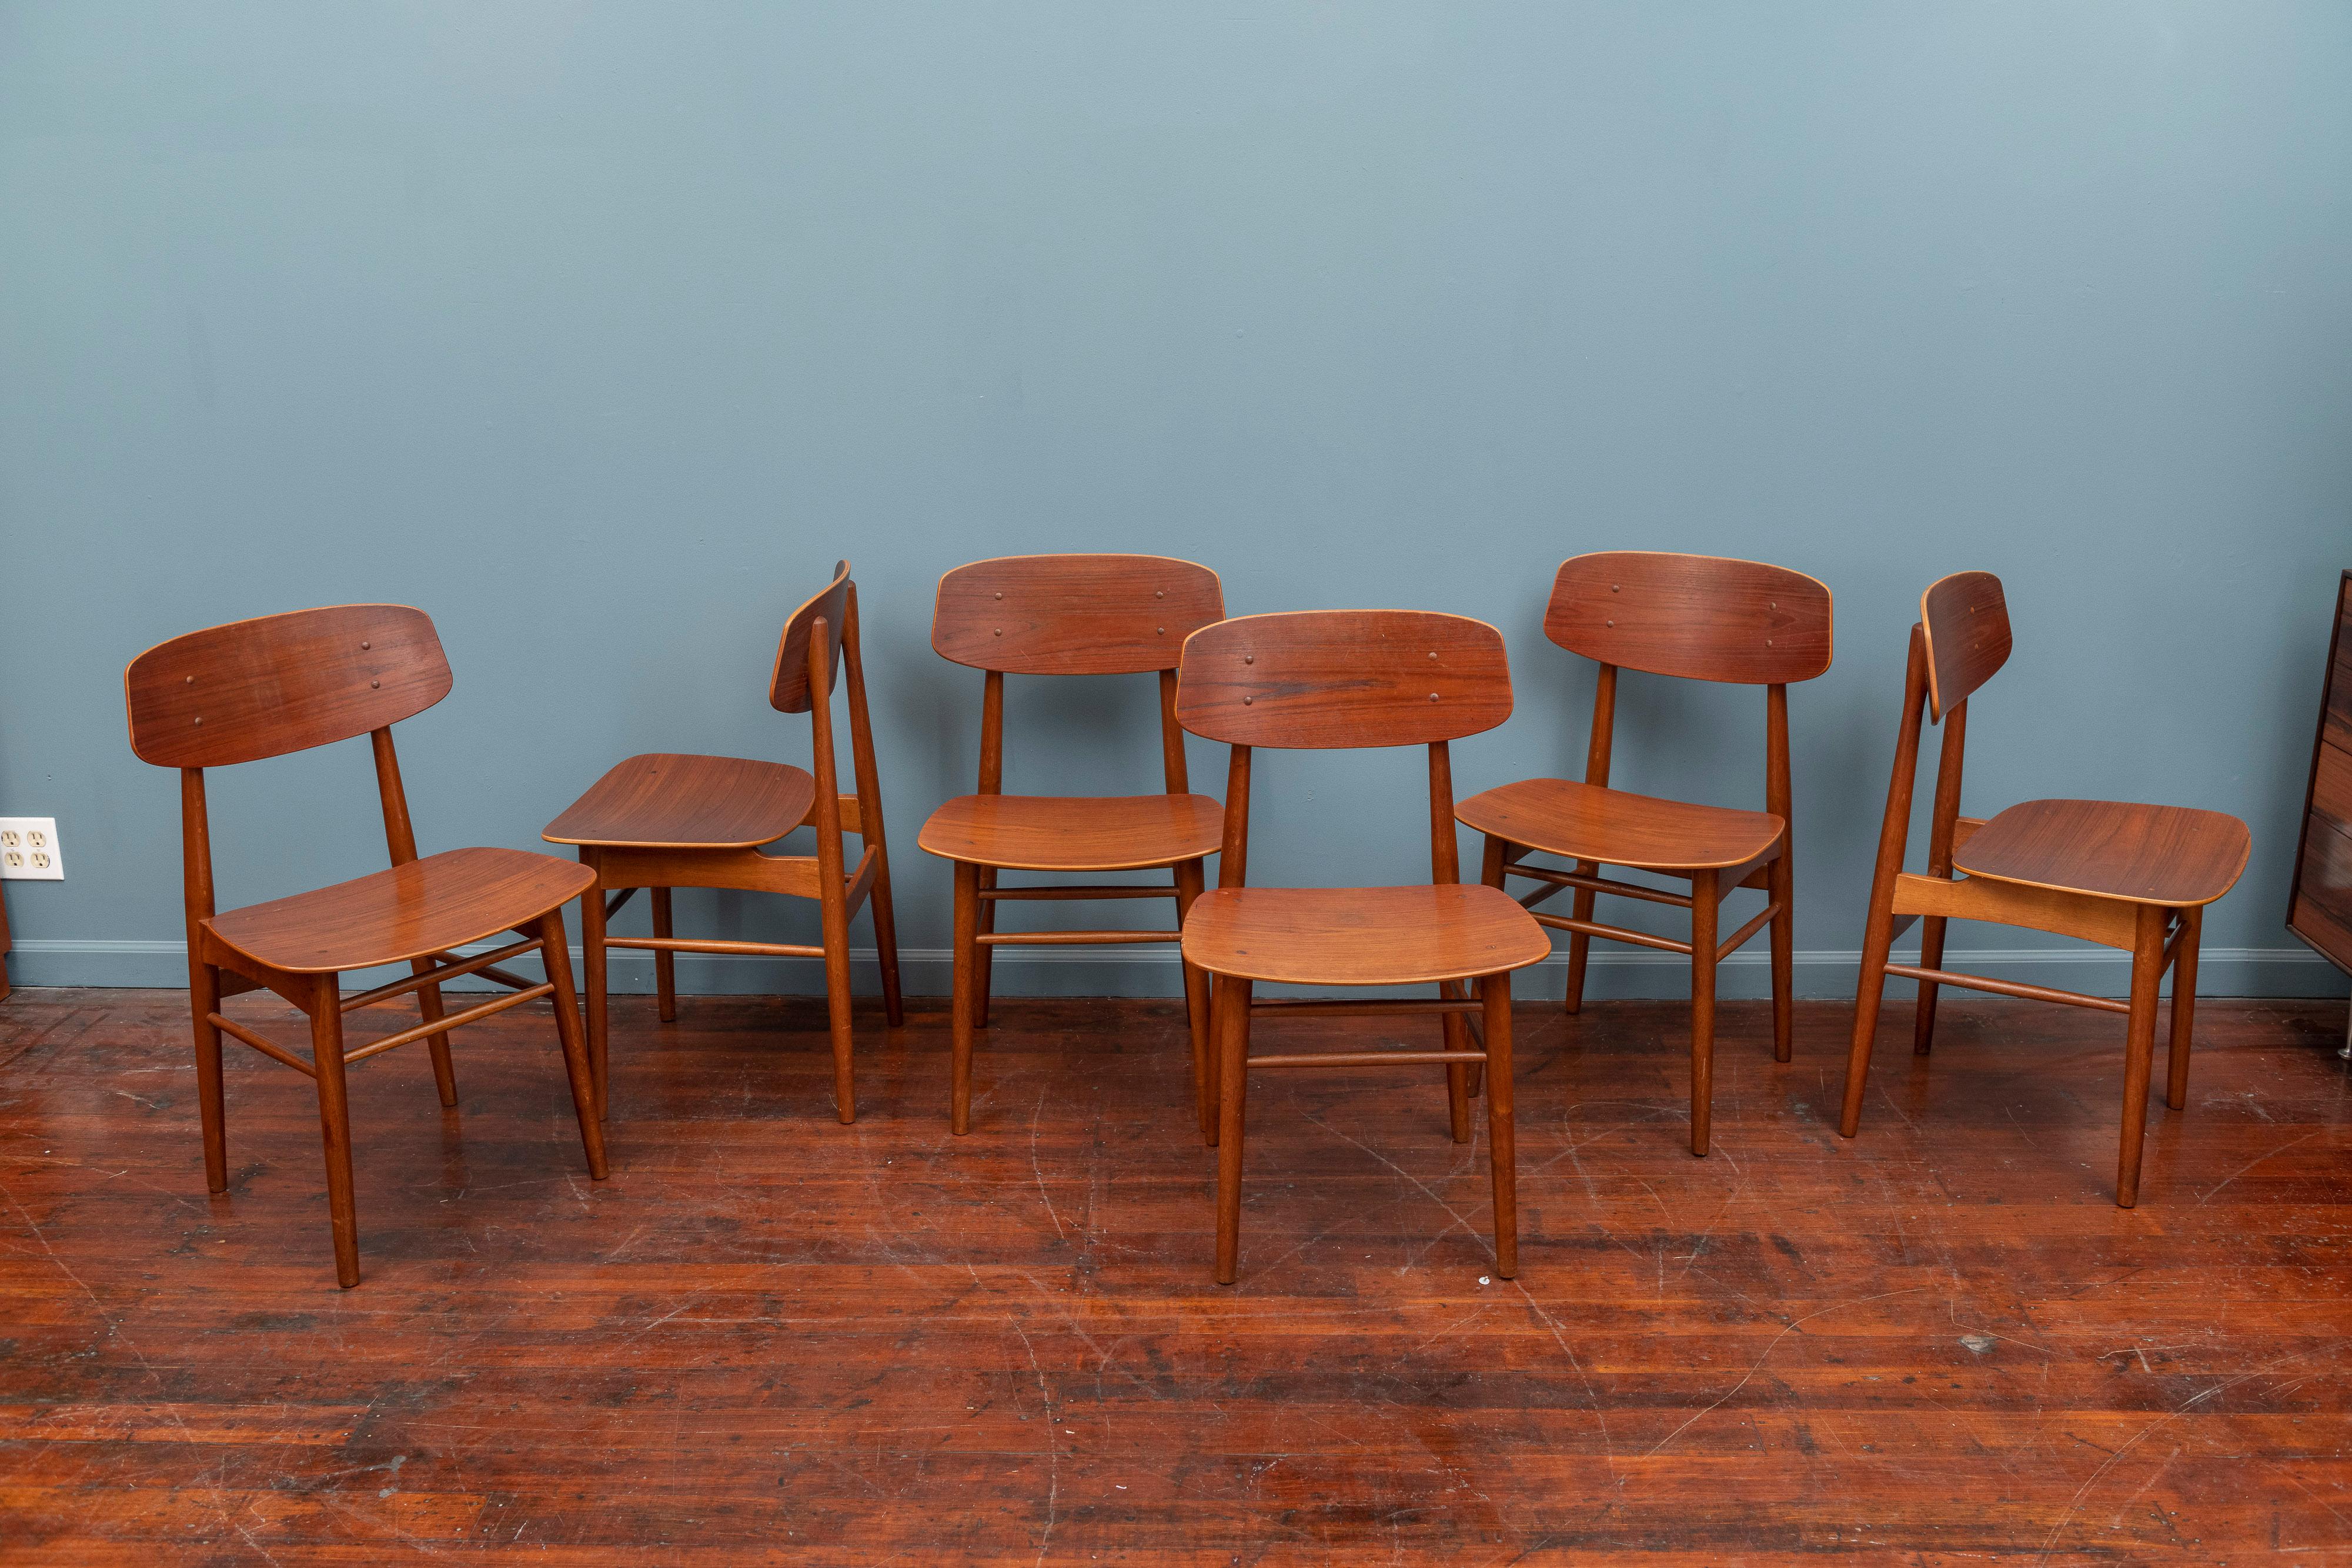 A beautiful set of six dining set designed by Børge Mogensen, manufactured by Søborg Møbelfabrik in Denmark, circa 1950. In very good to excellent condition. High quality construction with a Minimalist design aesthetic.